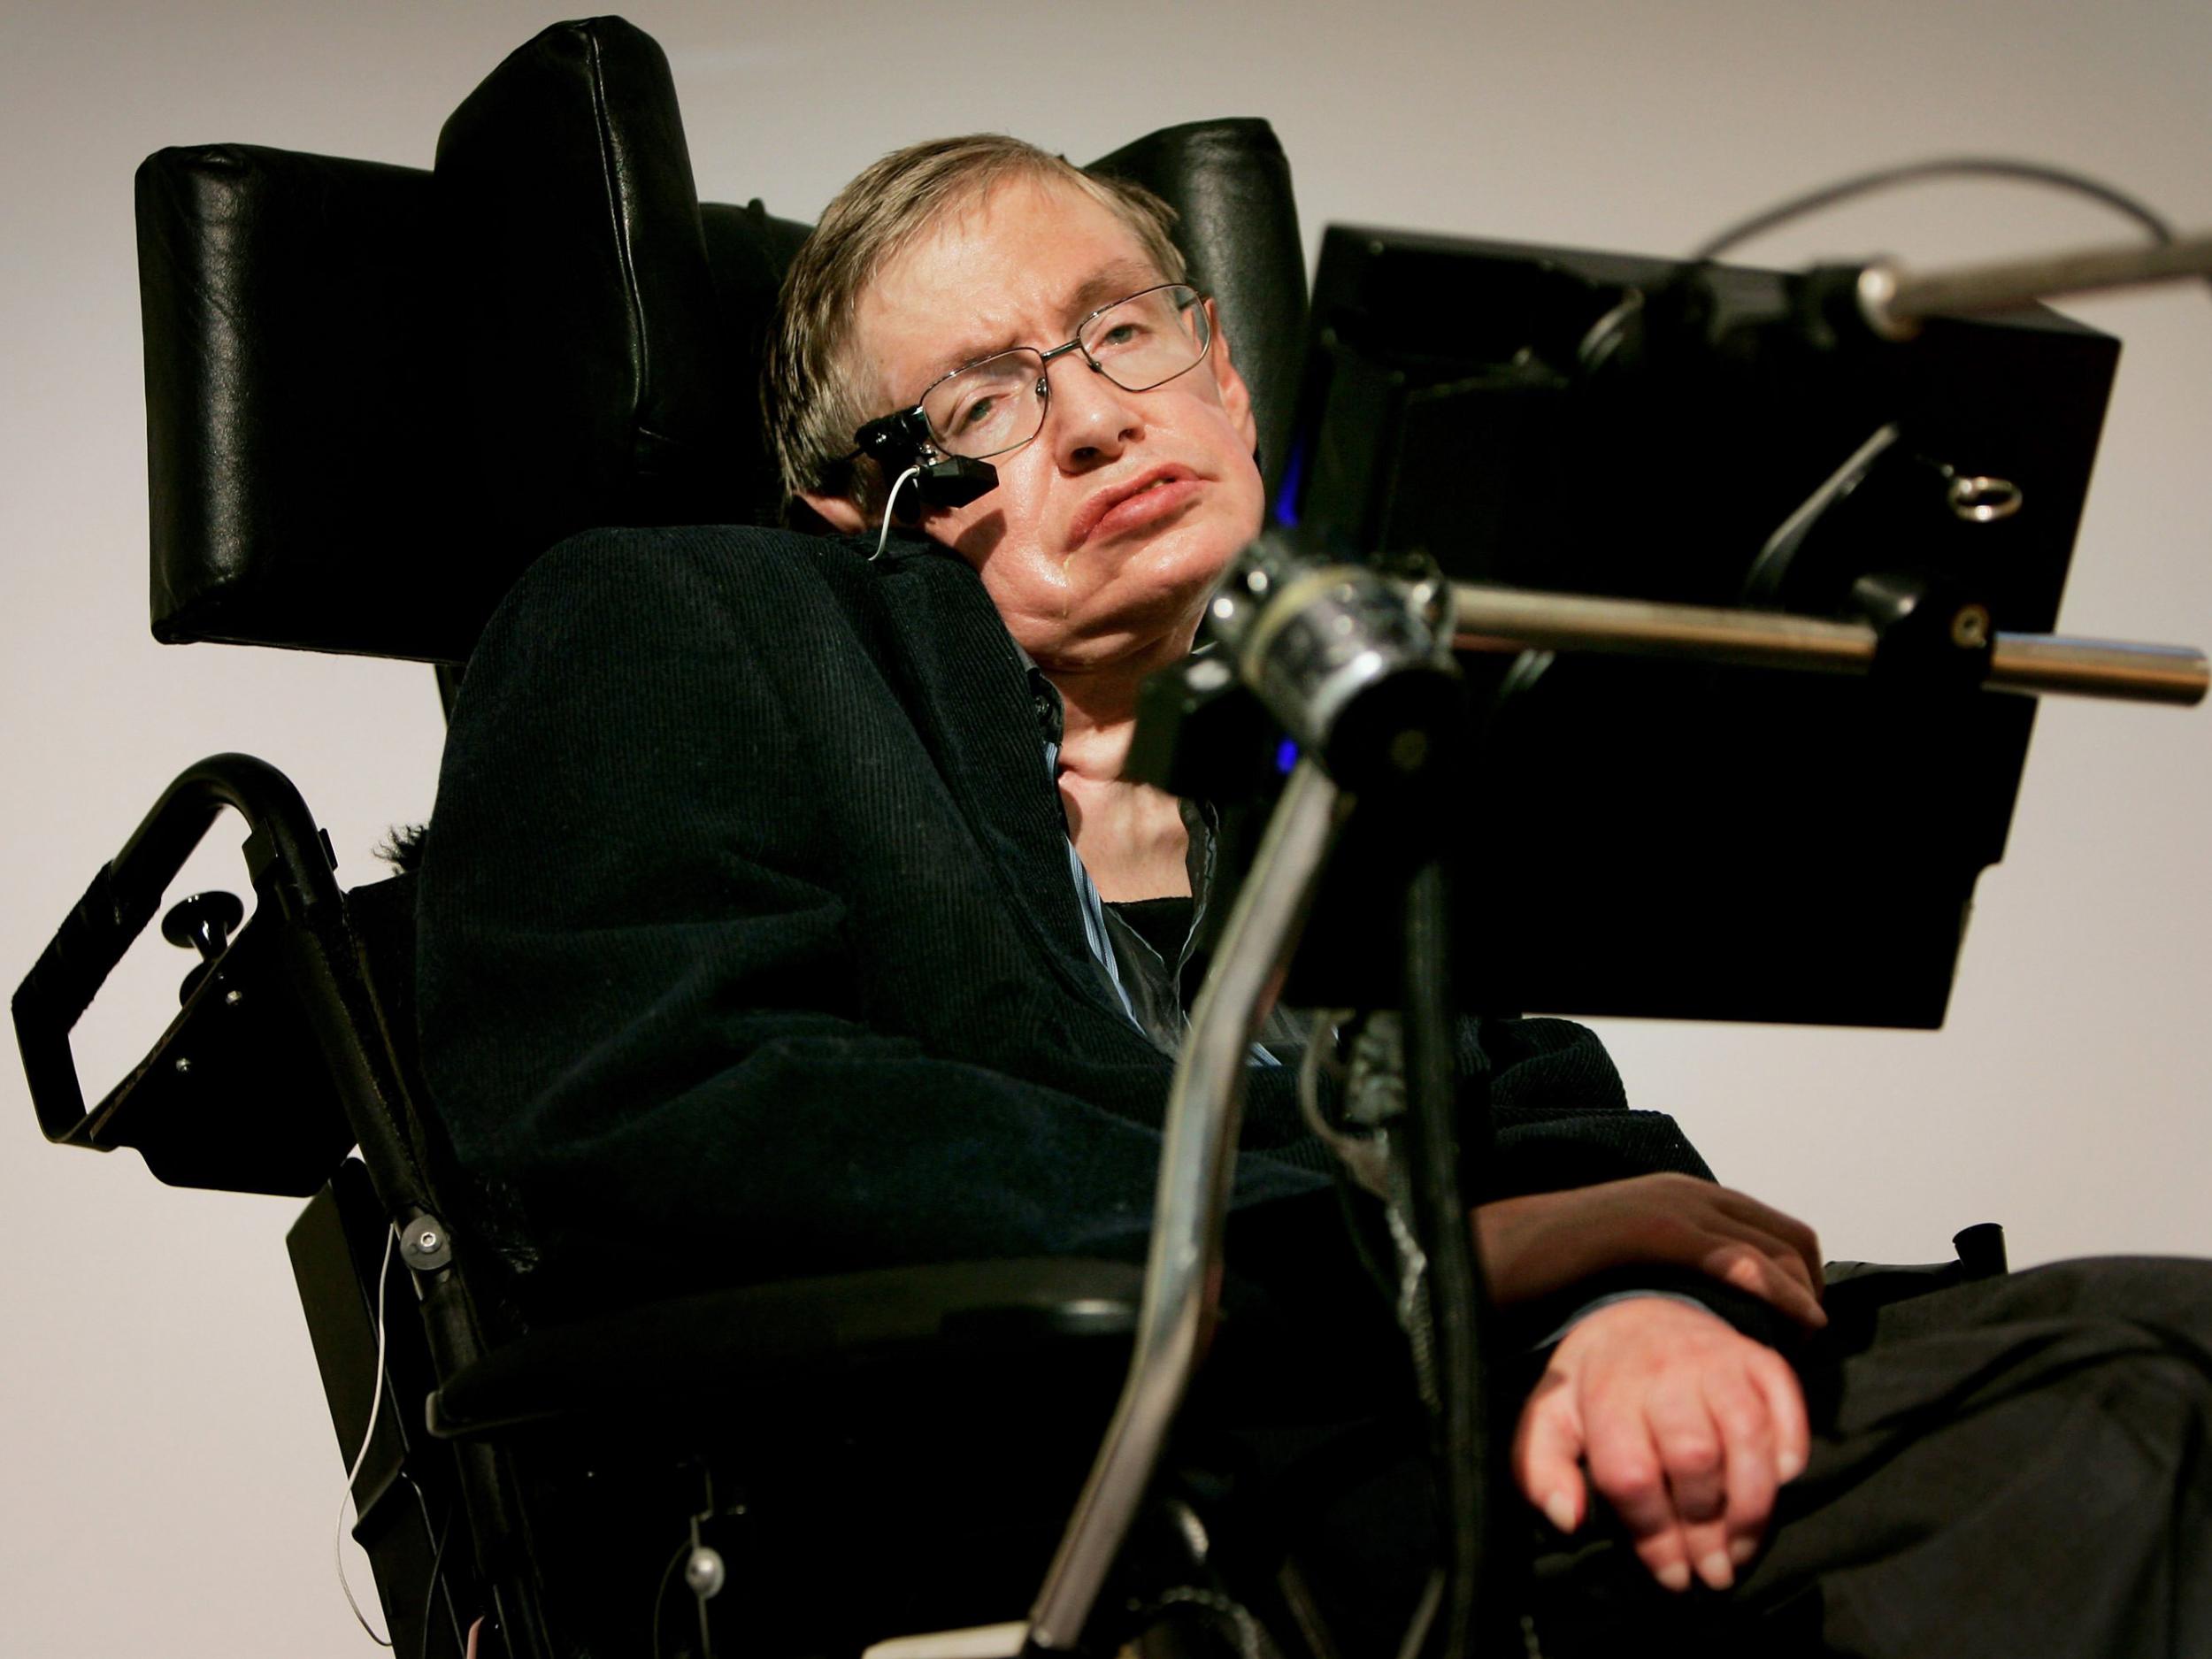 Related: Professor Stephen Hawking dies at the age of 76